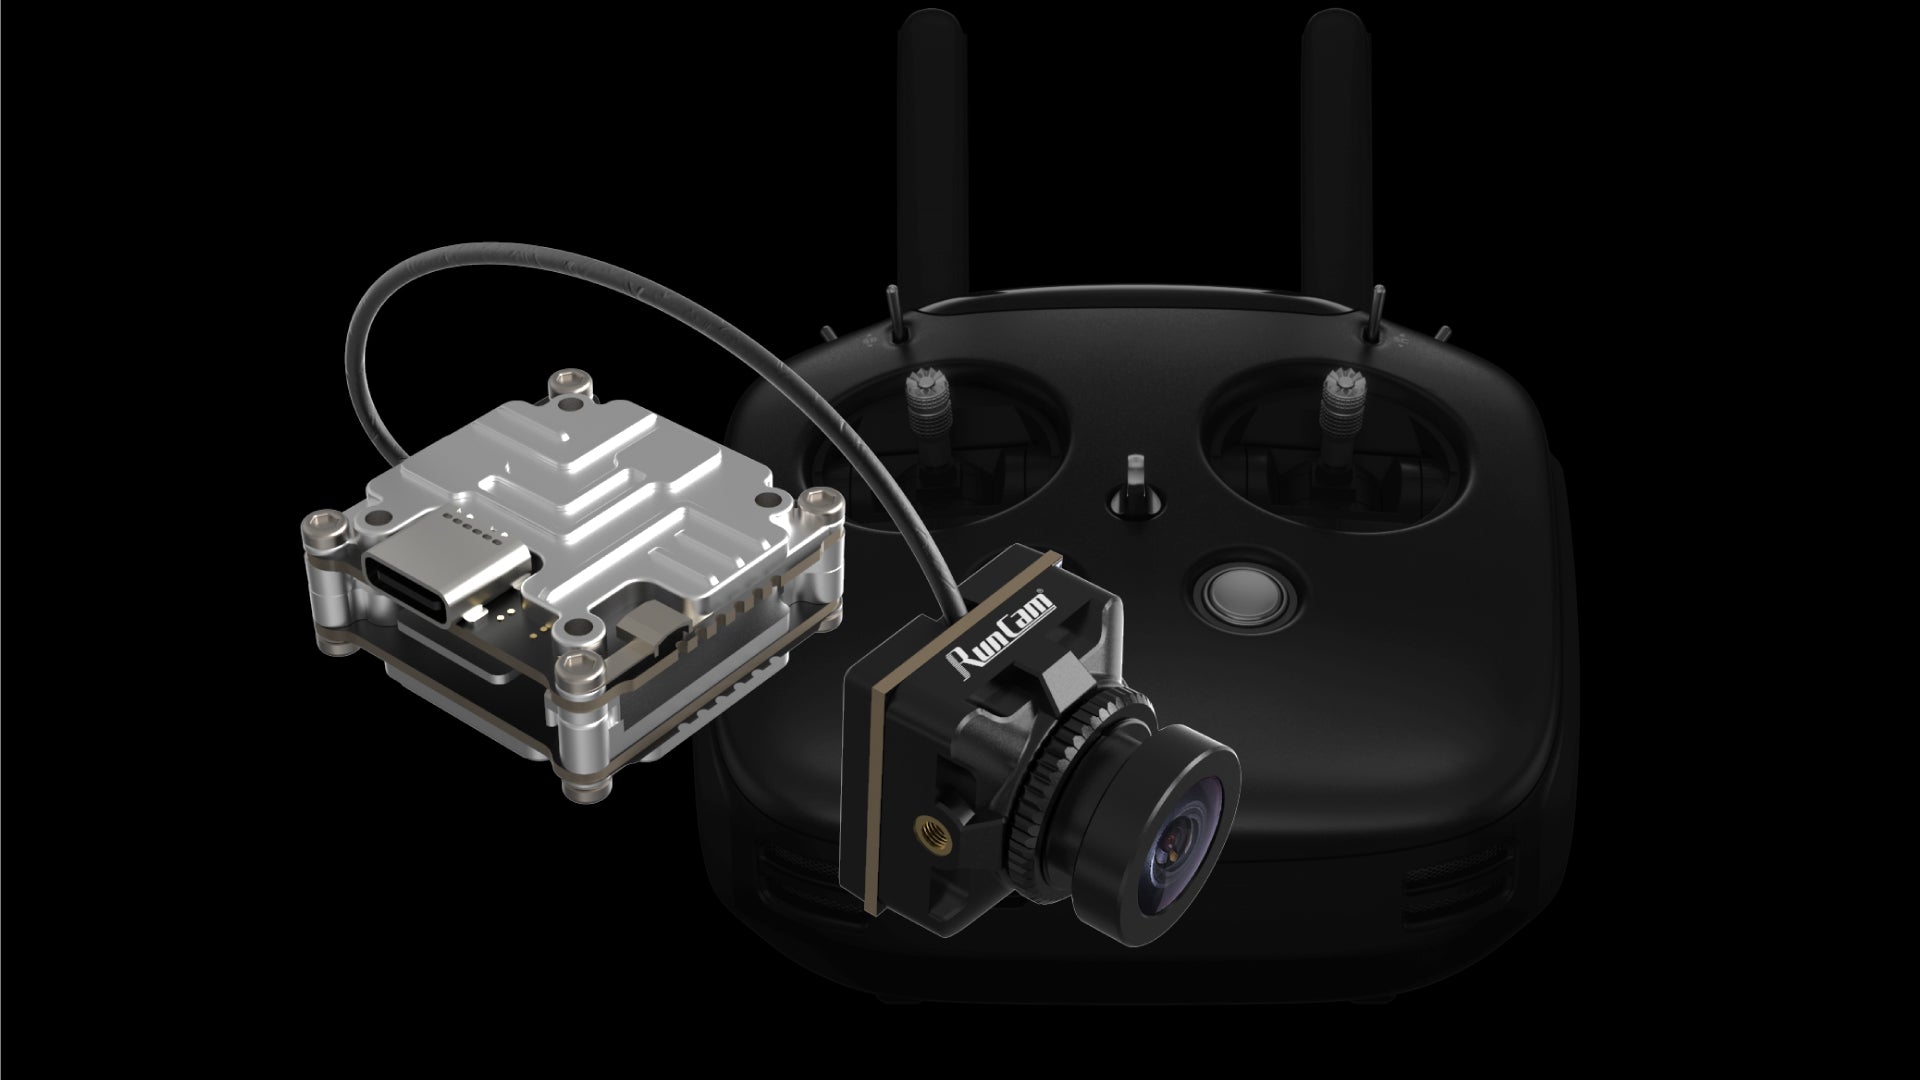 RunCam Link MIPI HD Kit, This helps to reduce cross-interference and provide an optimal racing experience